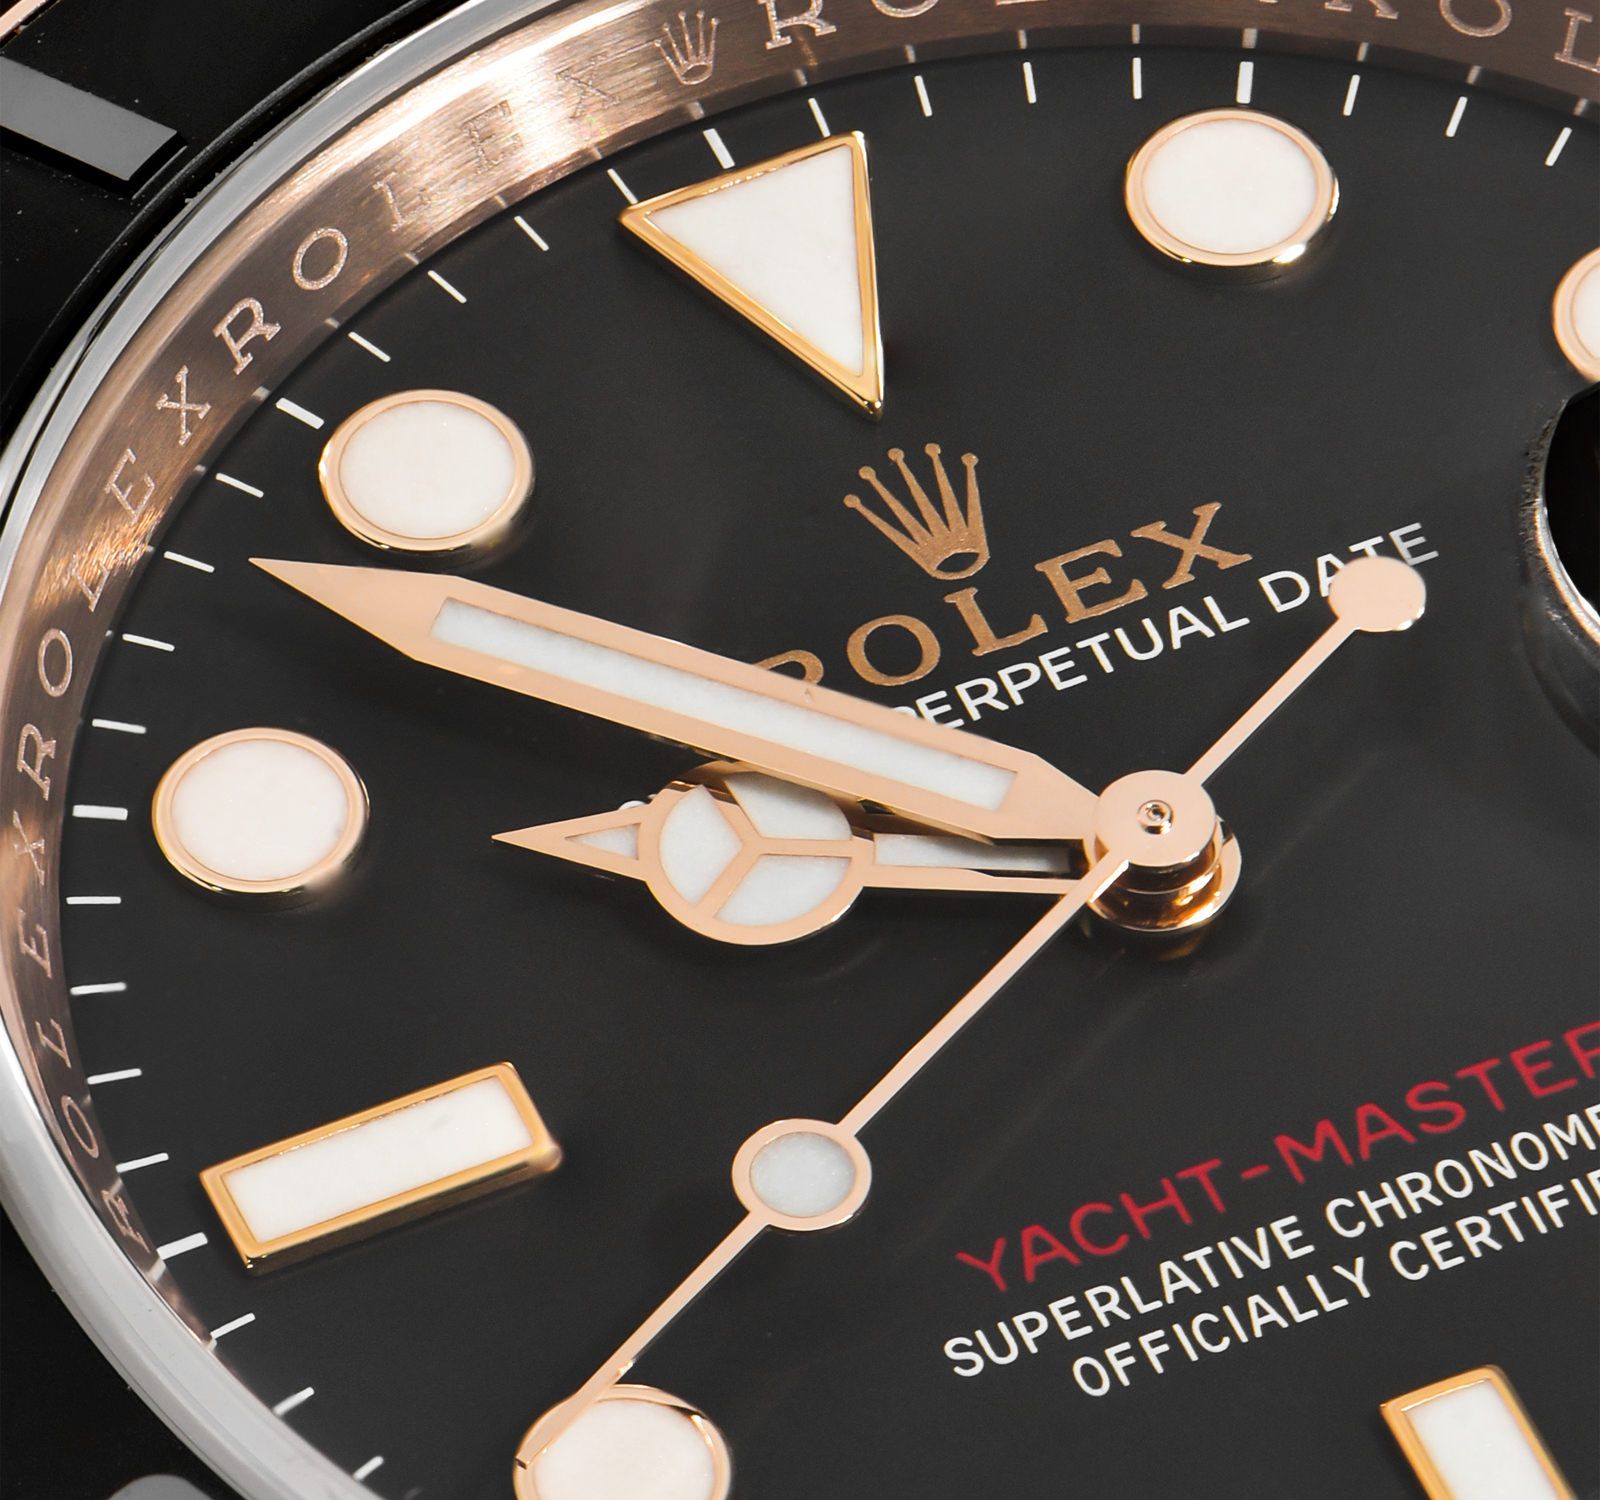 Pre-Owned Rolex Yacht-Master Price